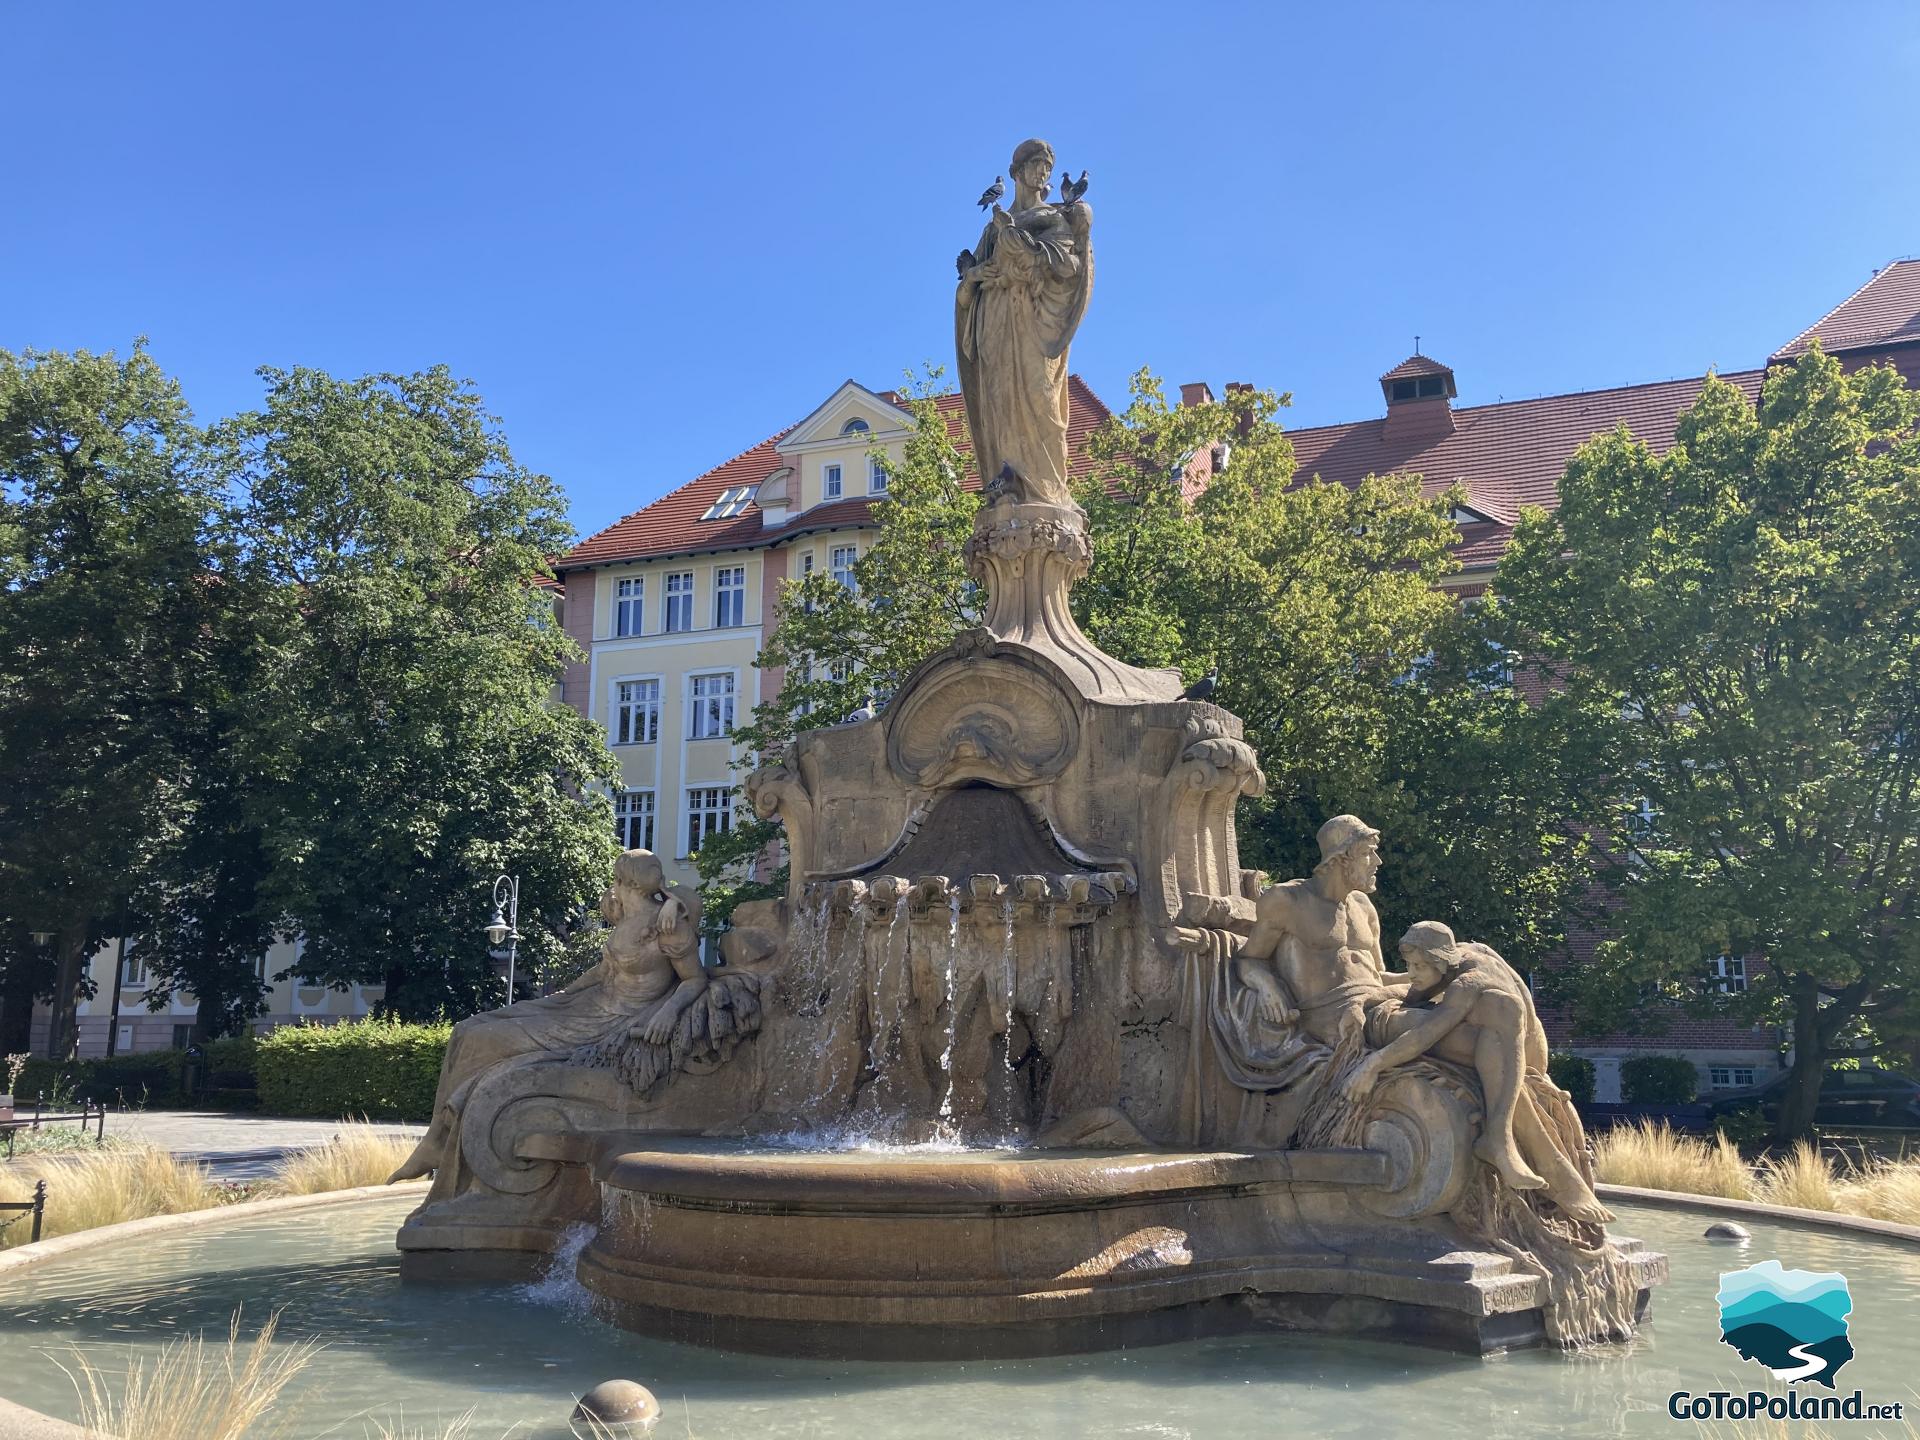 a fountain at the top of which there is a statue of Ceres, the goddess of harvest, and at her feet you can see several figures that are allegories of Opole industry, fishing and agriculture